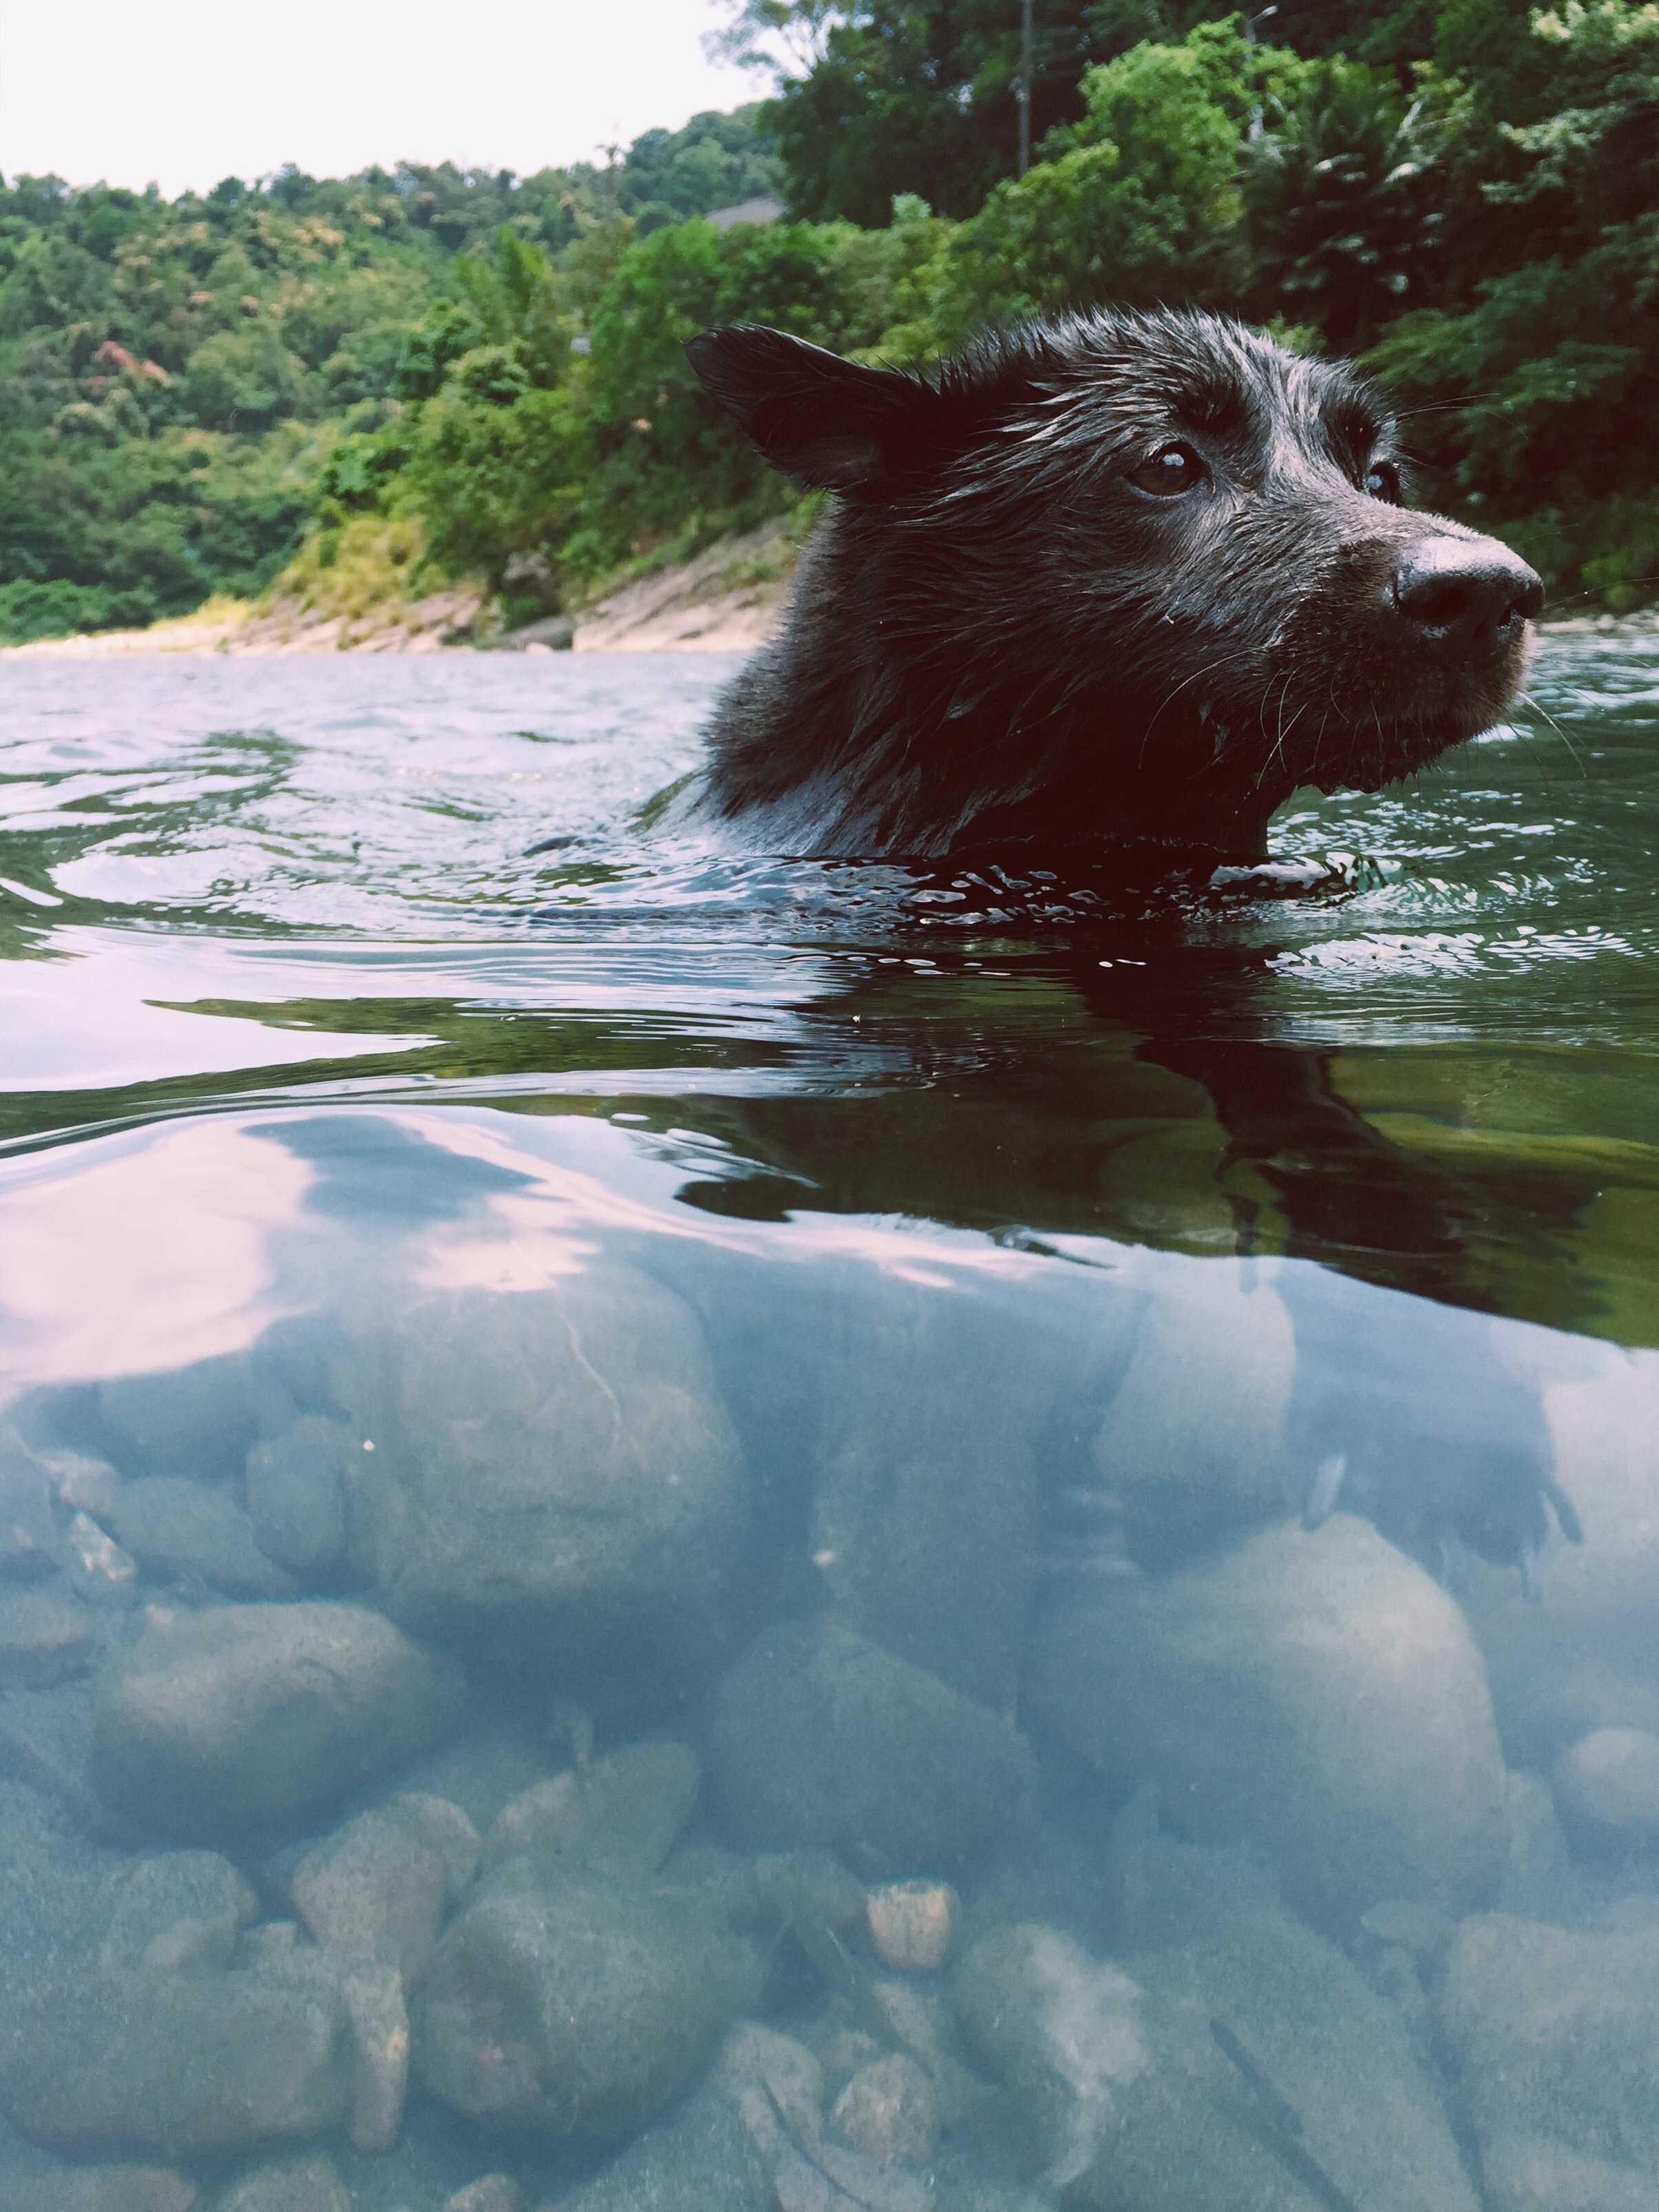 Short-coated black dog in body of water photo